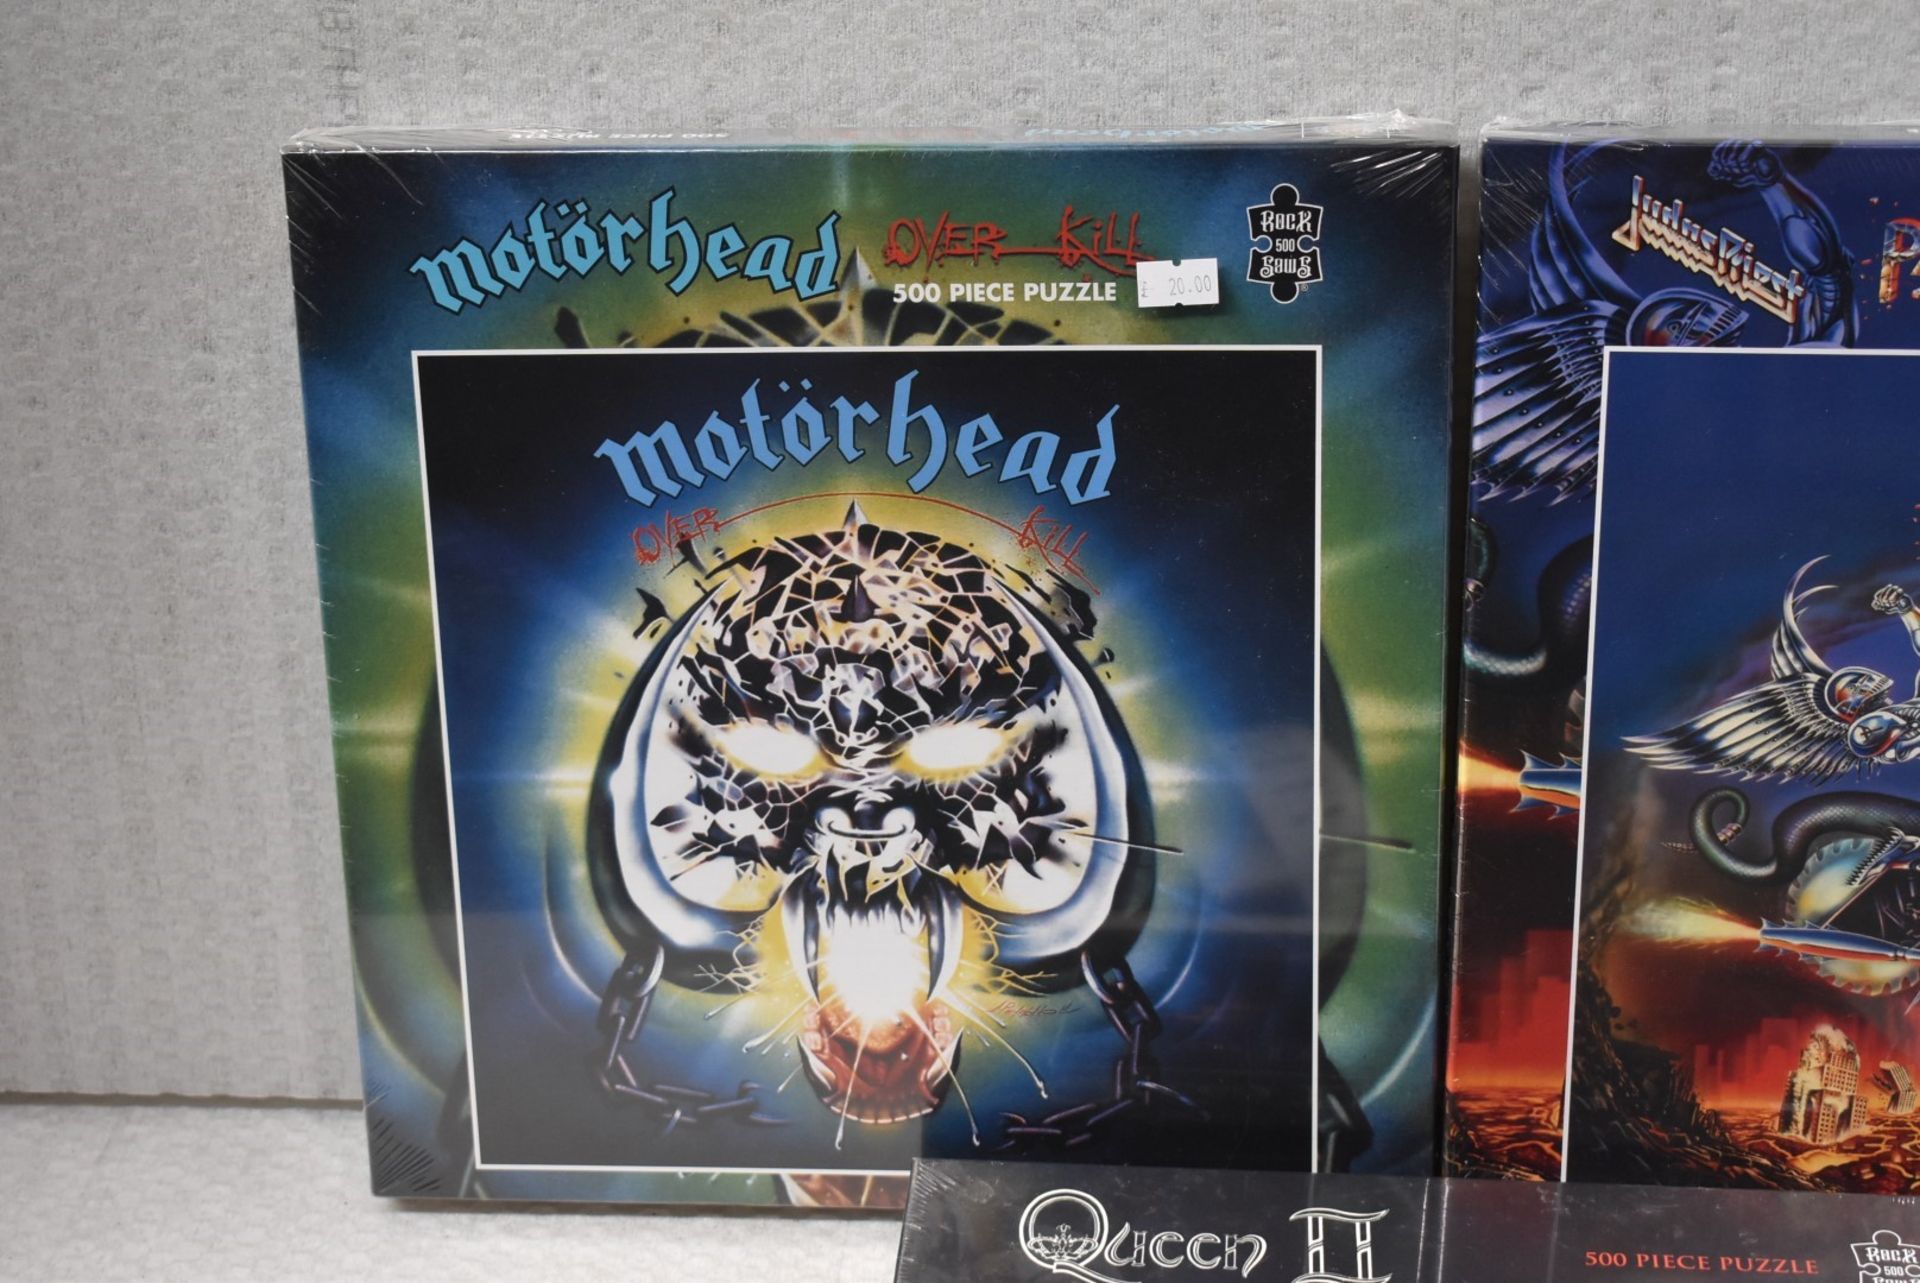 3 x 500 Piece Jigsaws By Rock Saws - Includes Judas Priest, Queen & Motorhead - RRP £60 - Image 2 of 4